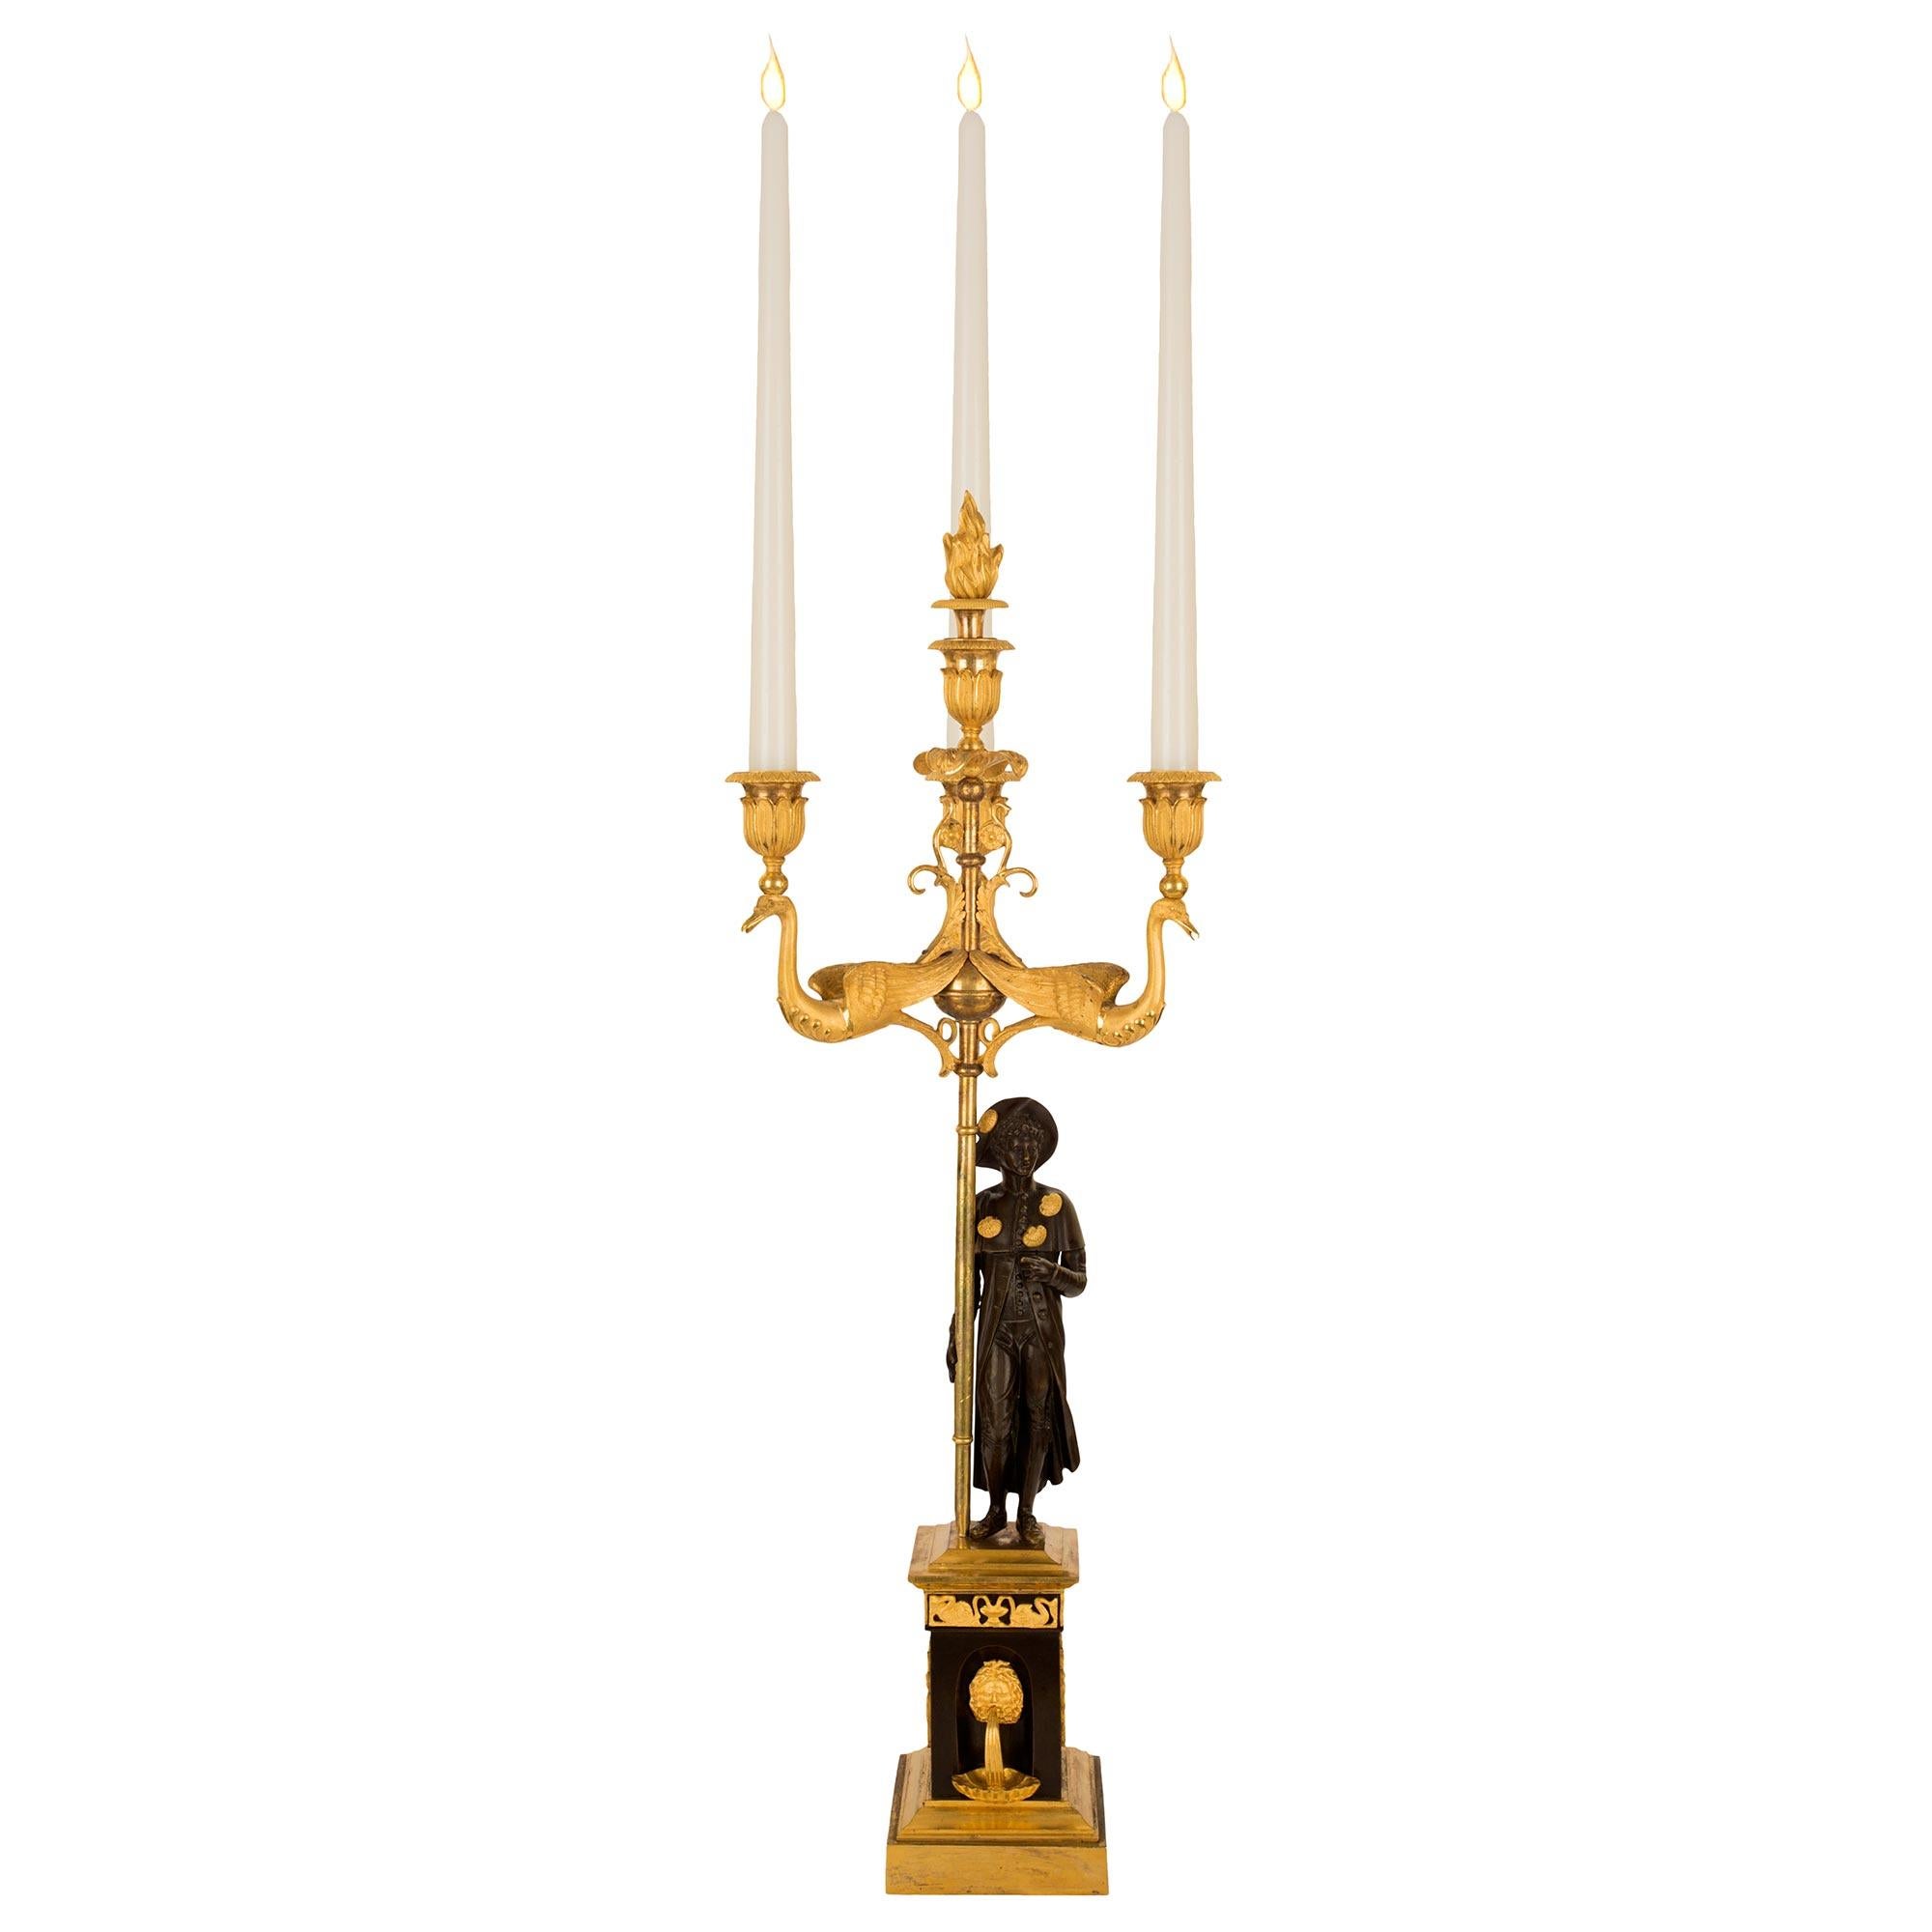 Pair of French 1st Empire Period Bronze and Ormolu Three-Light Candelabras For Sale 1